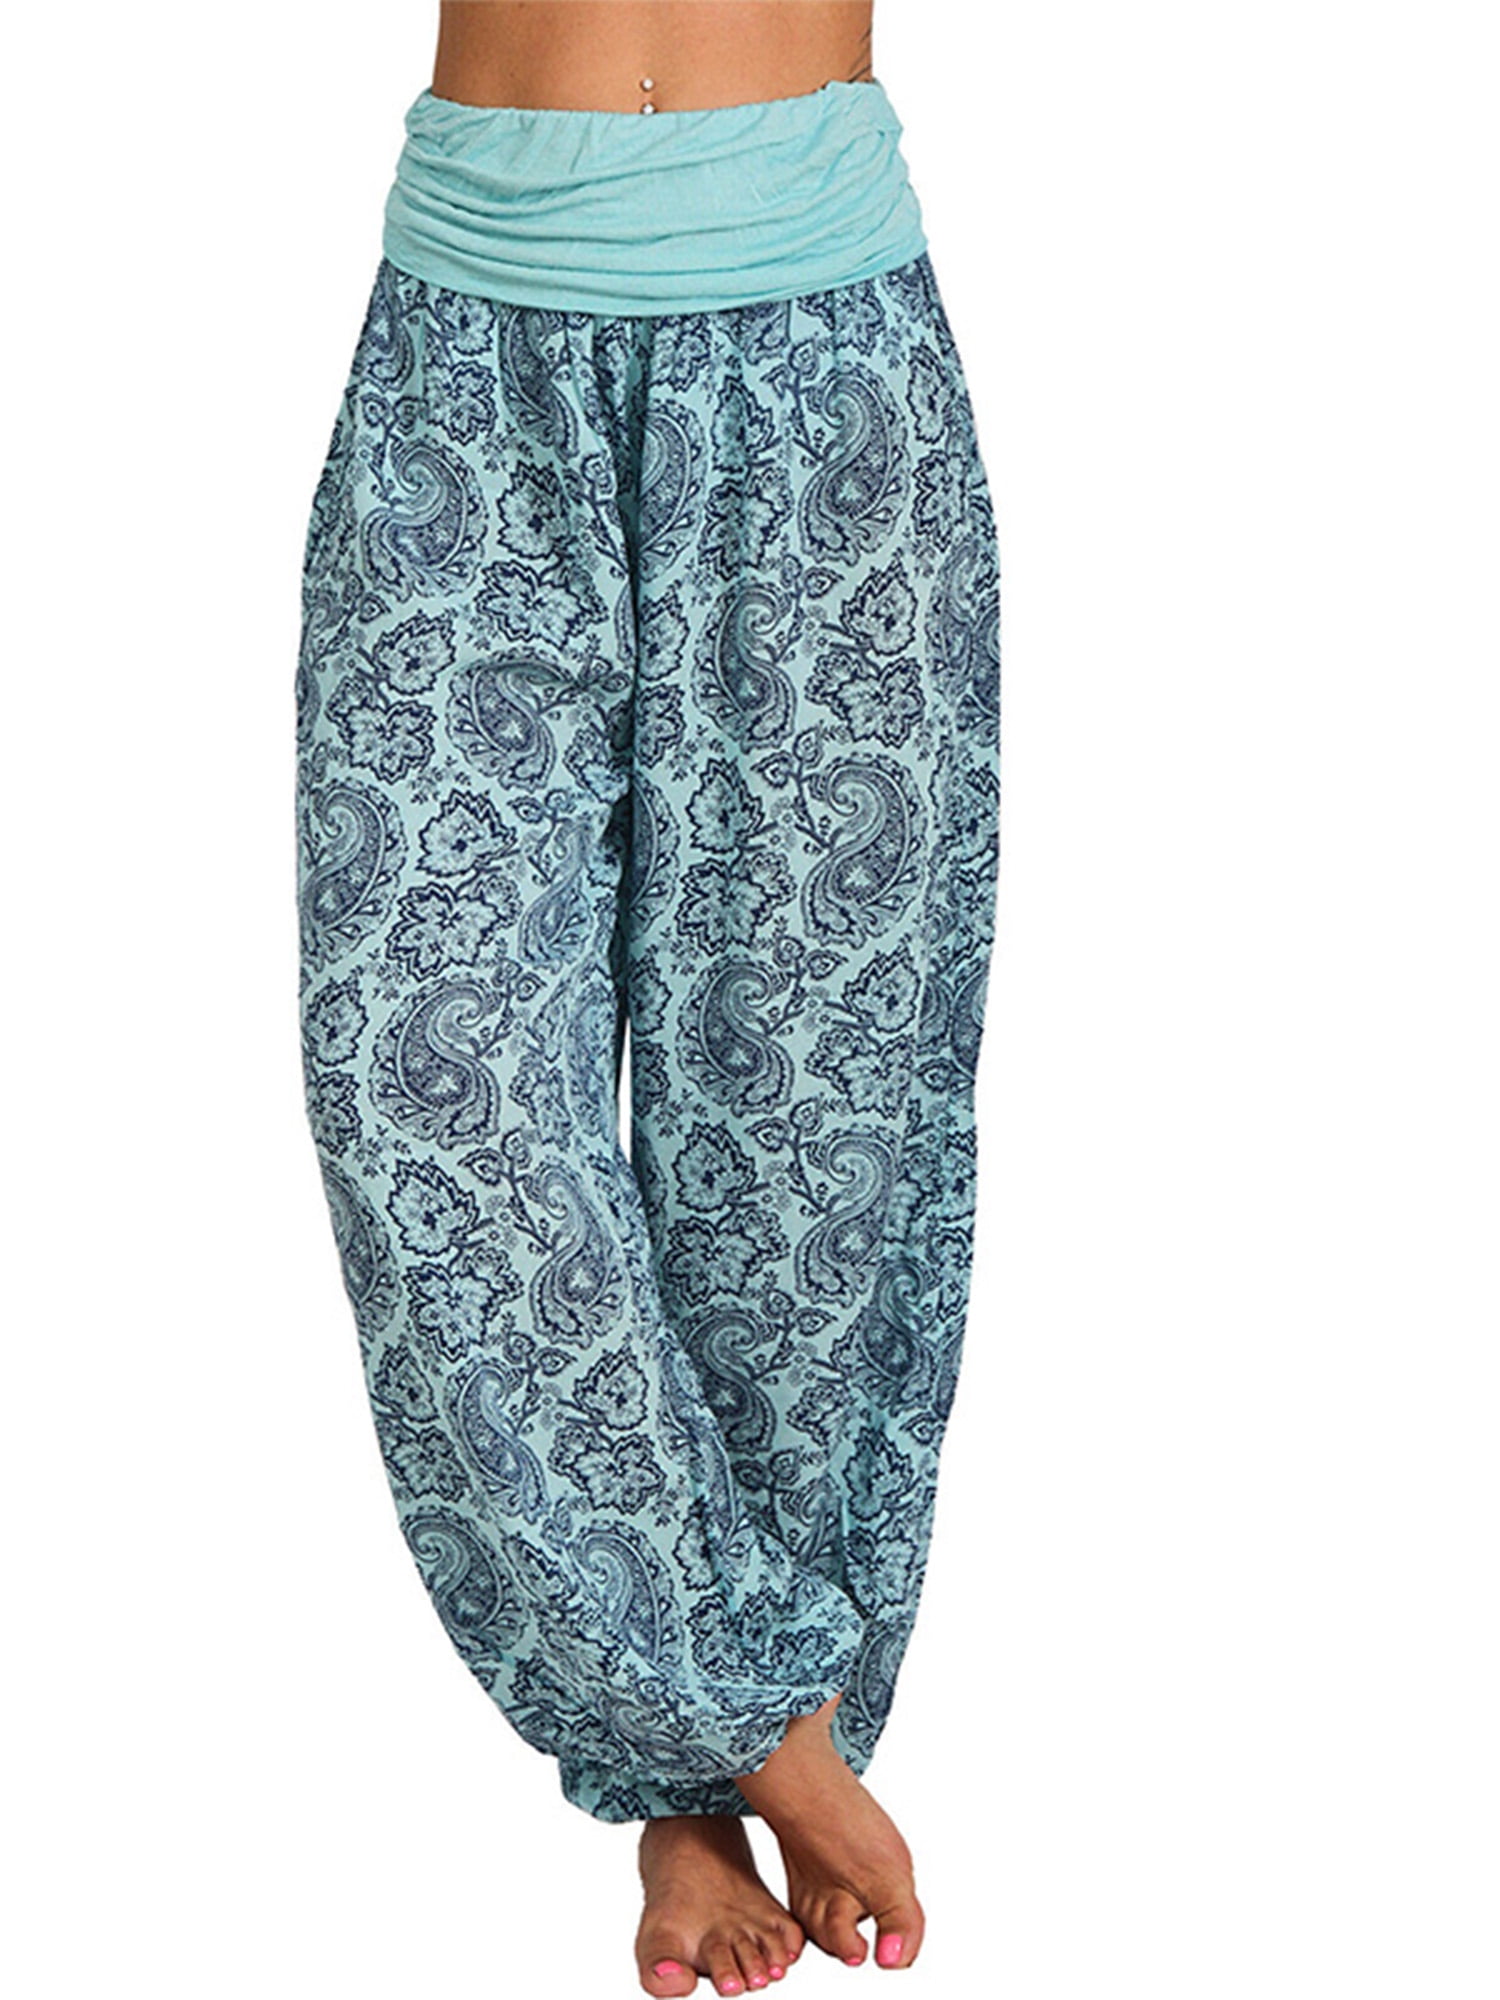 Floral Harem Joggers with fold-over waistband.